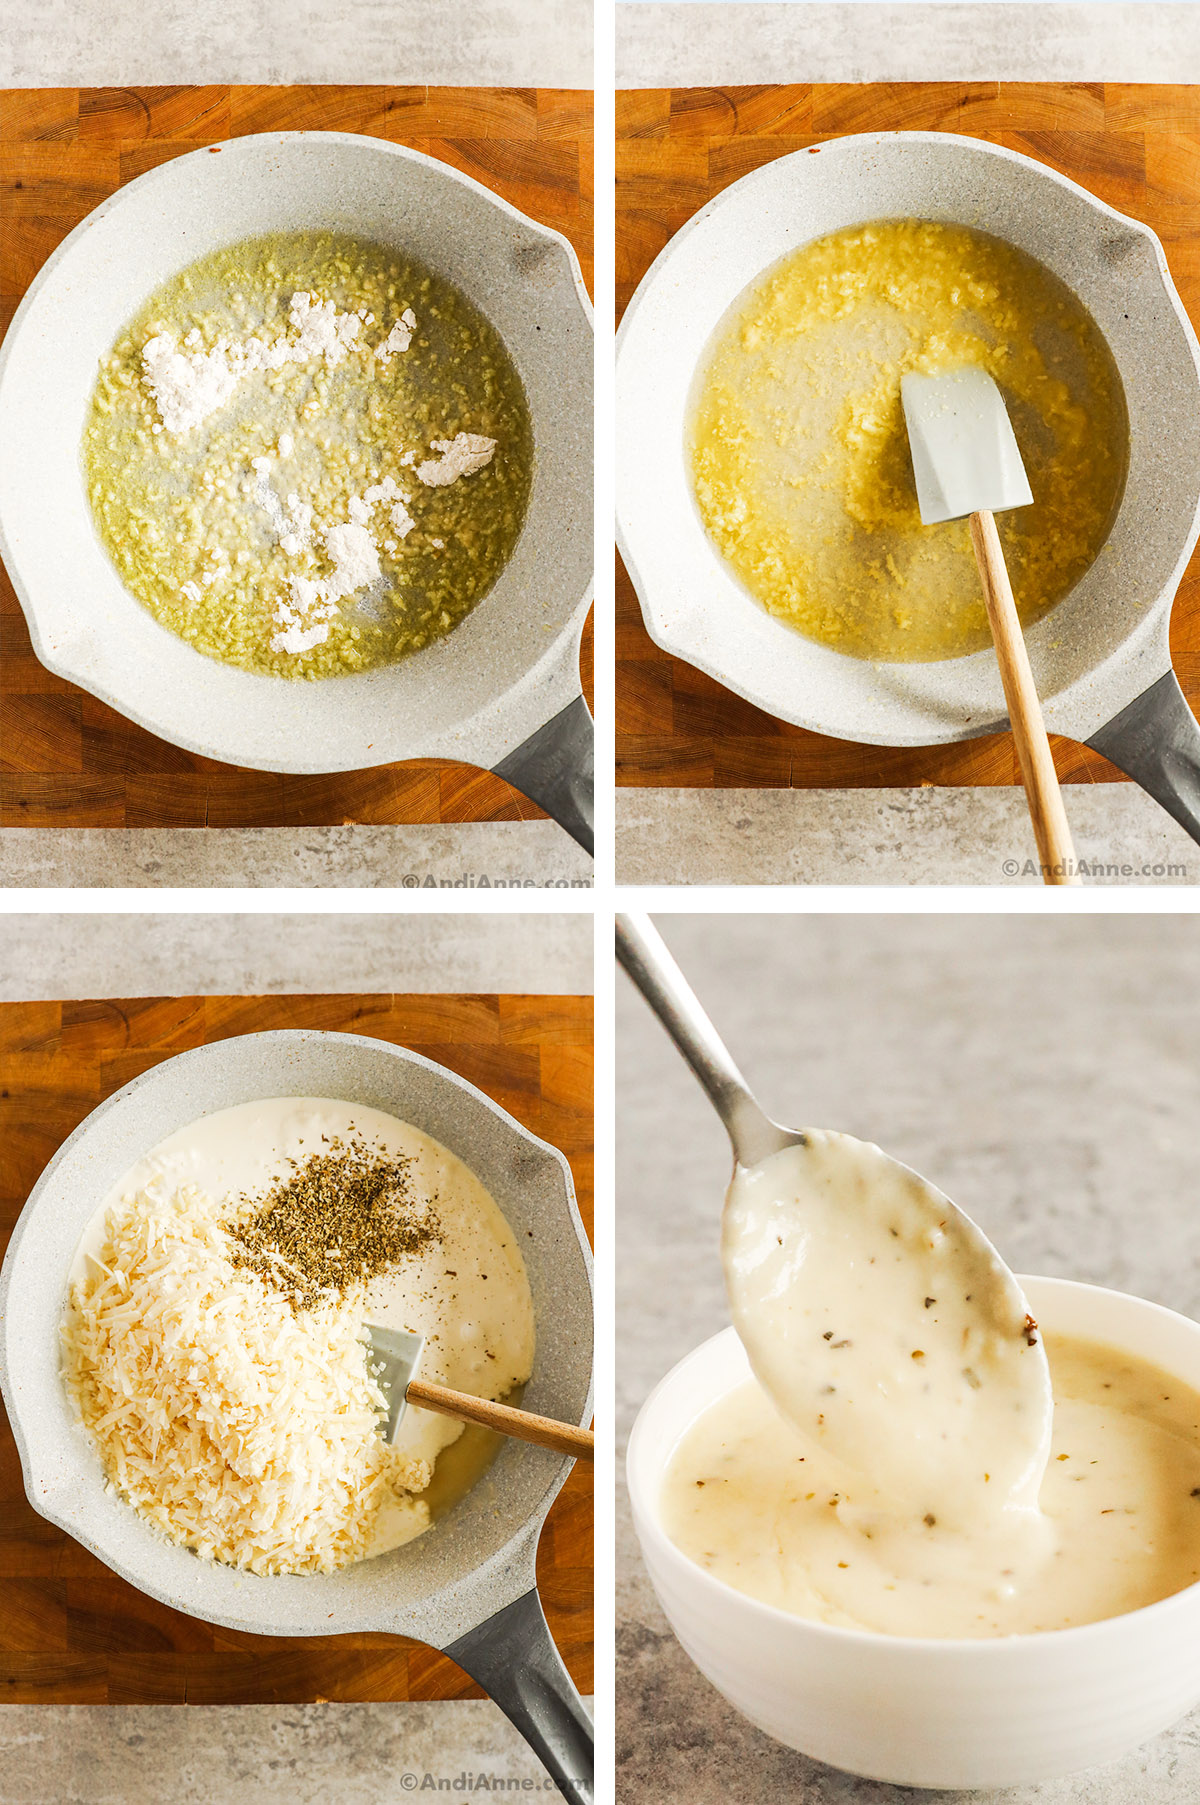 Four images of garlic parmesan sauce being made in a frying pan in different stages.